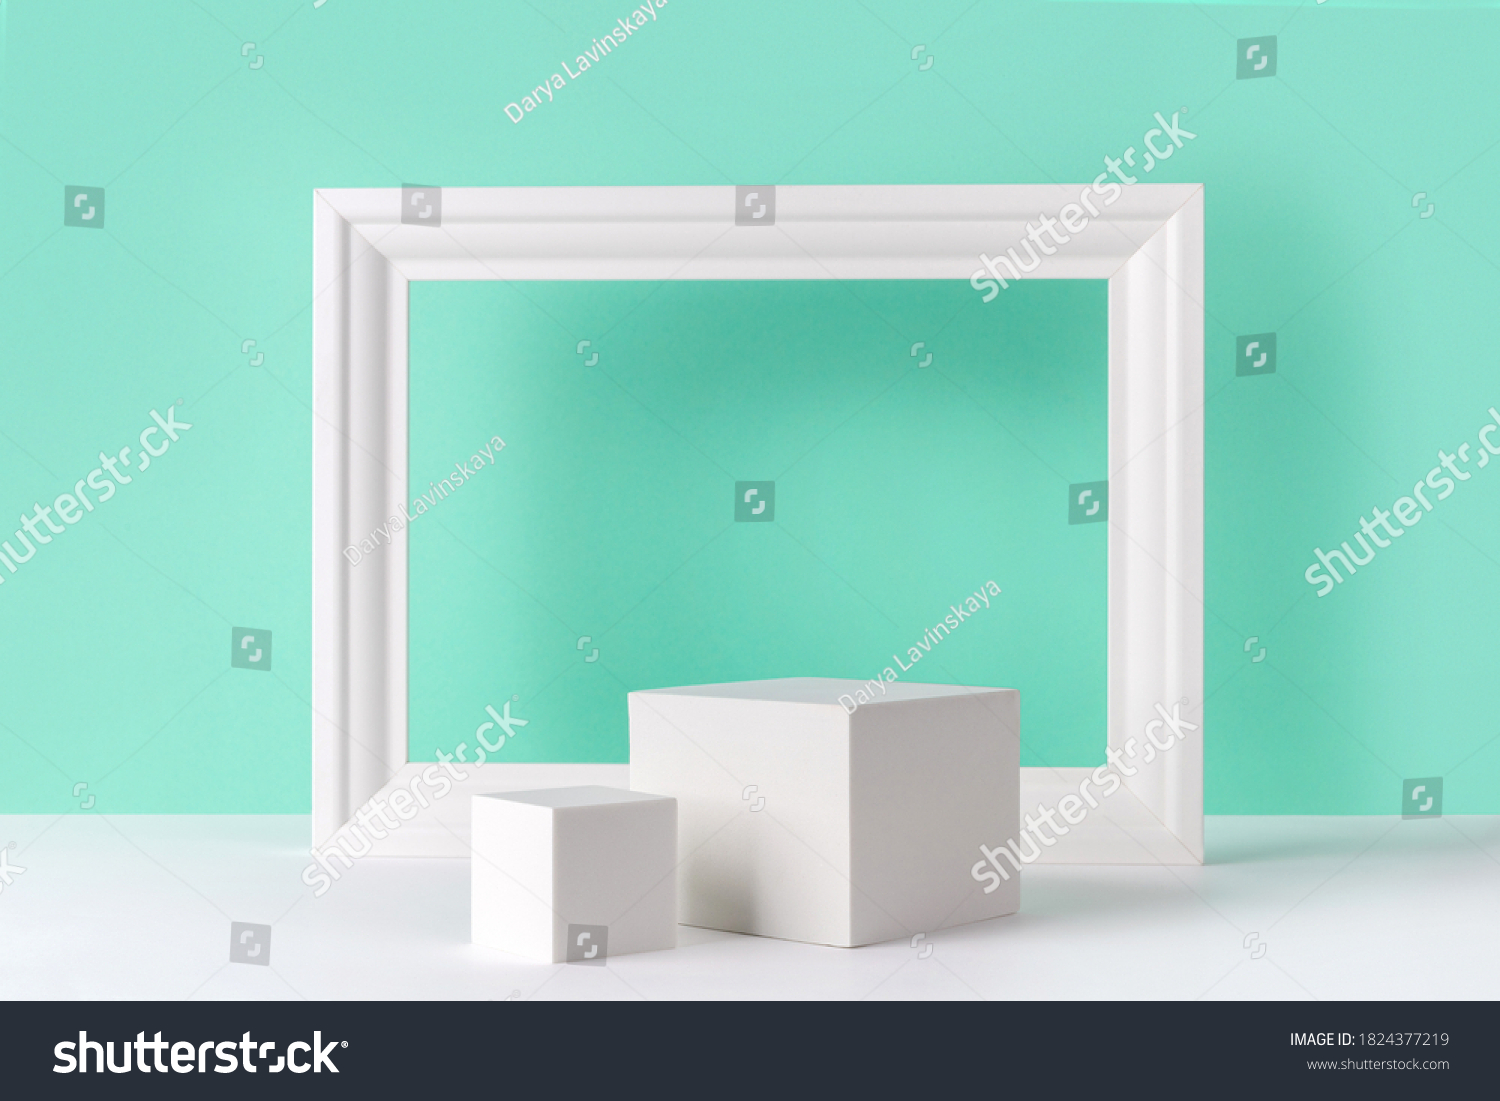 Mock up background with podium for product display and frame. Blank product stand in minimal slyle on turquoise background. #1824377219